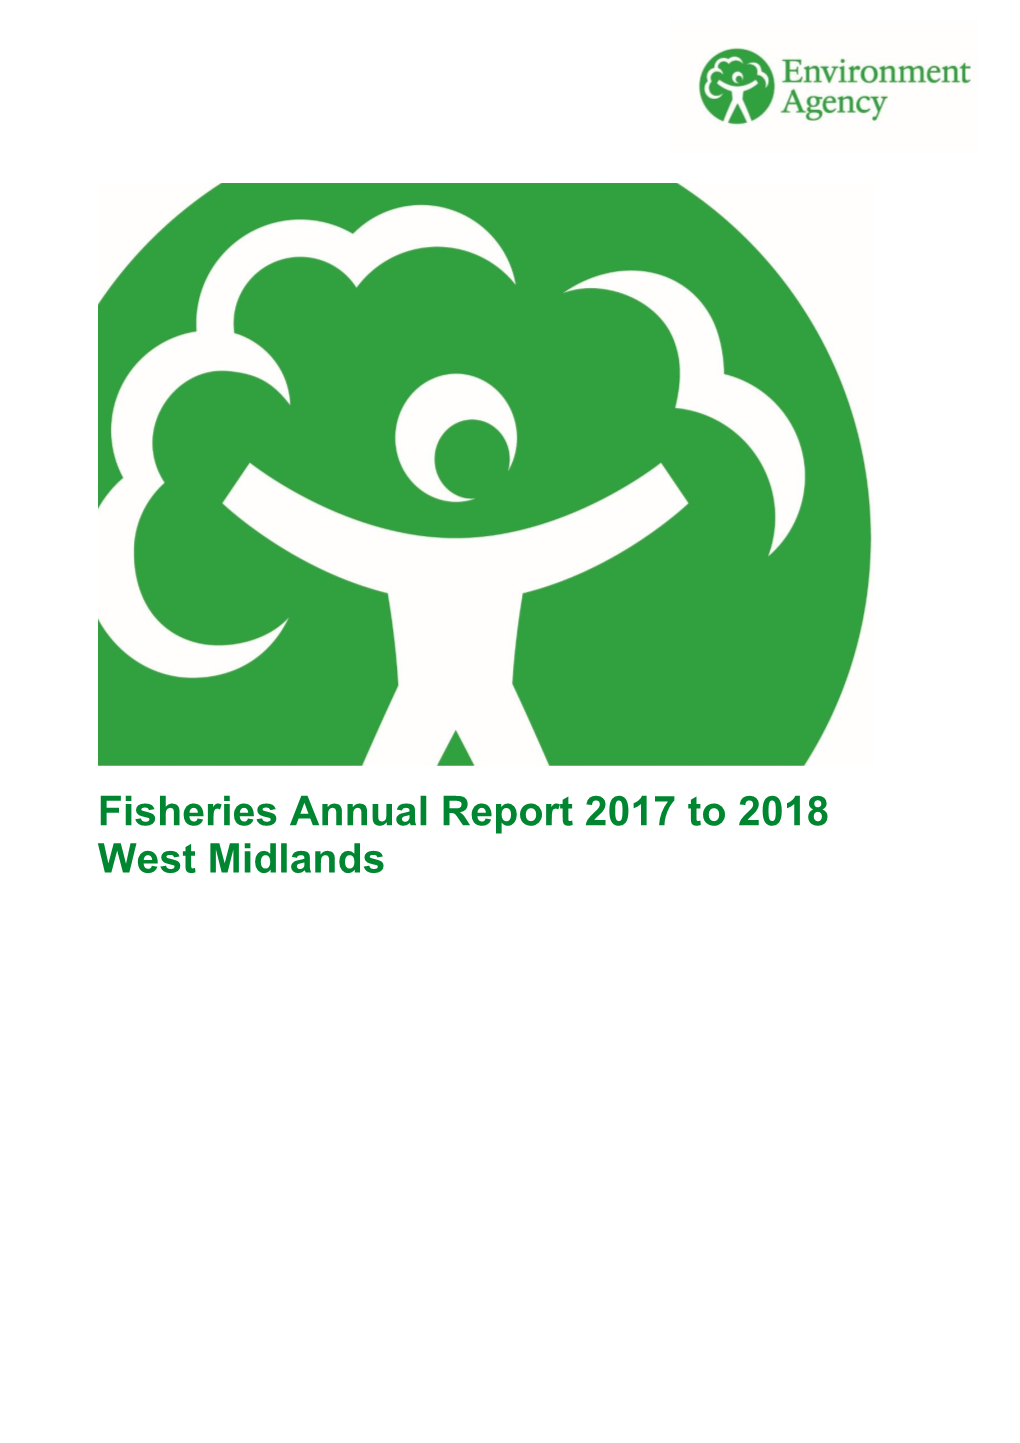 Fisheries Annual Report 2017 to 2018 West Midlands